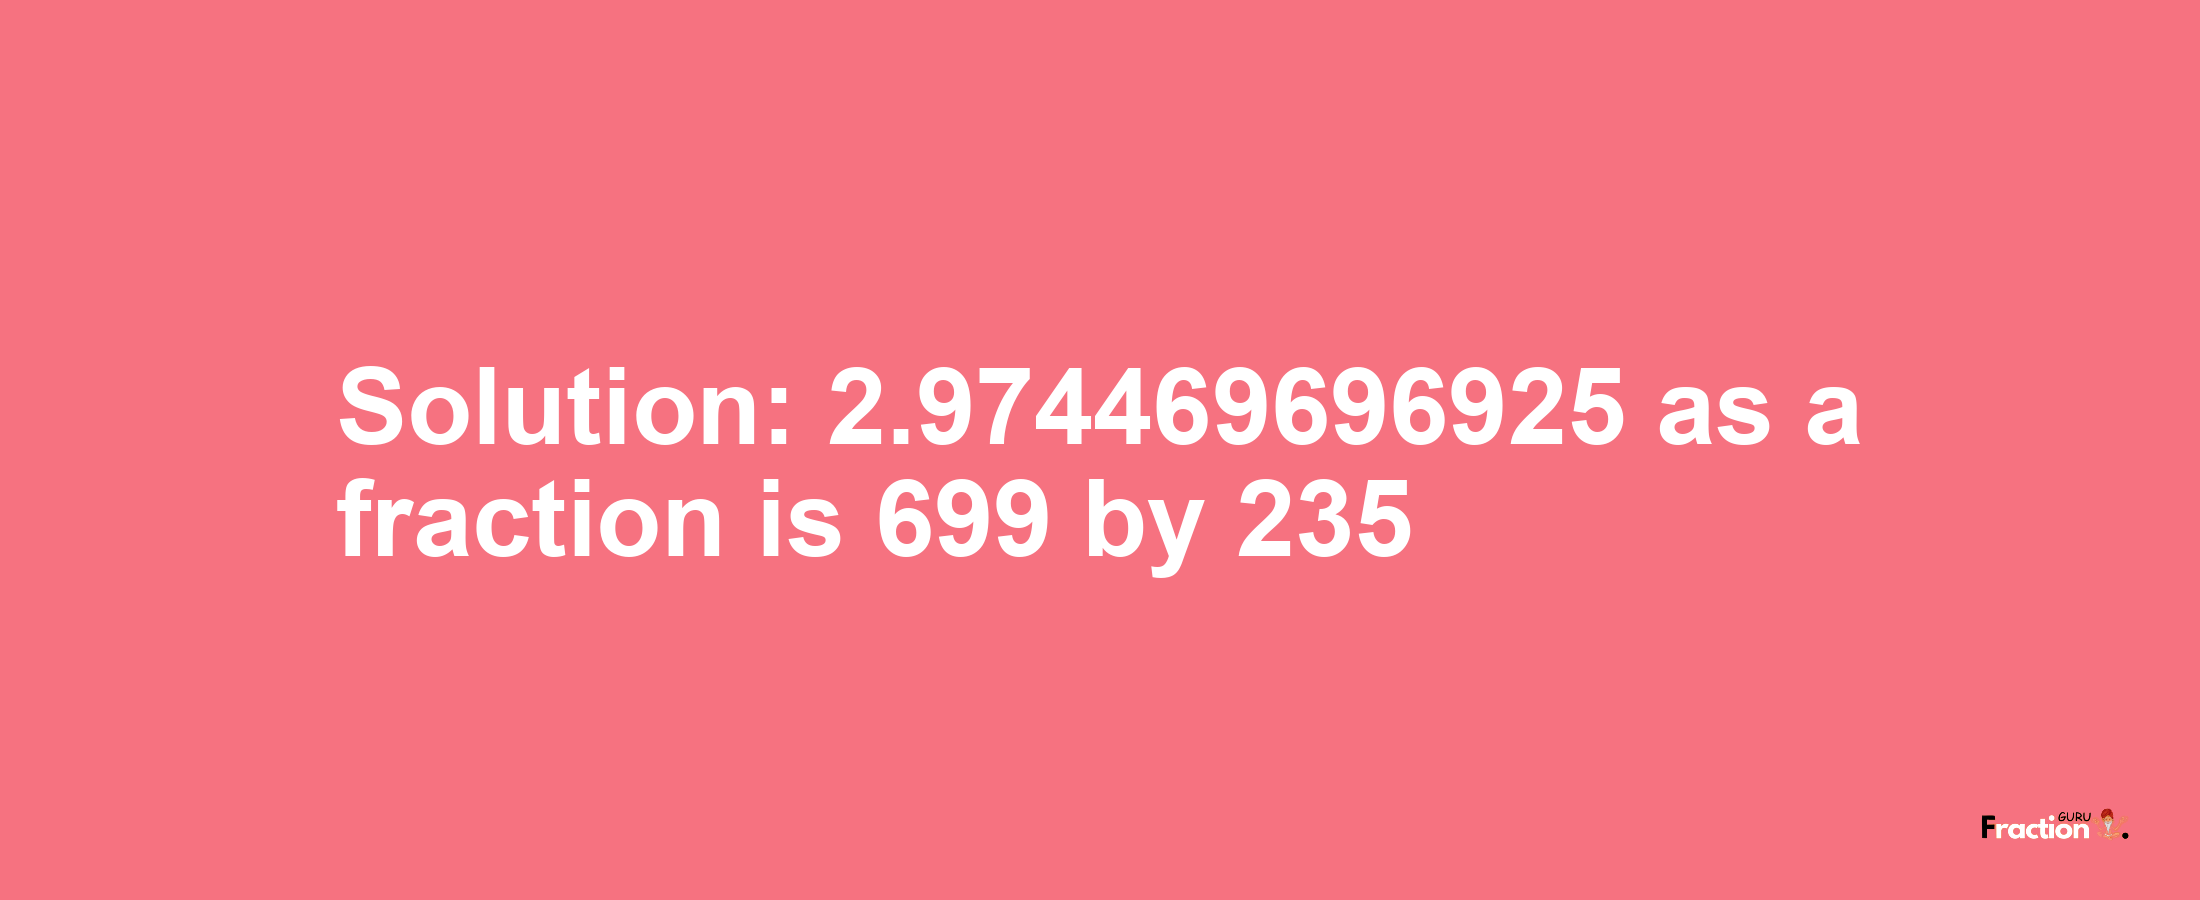 Solution:2.974469696925 as a fraction is 699/235